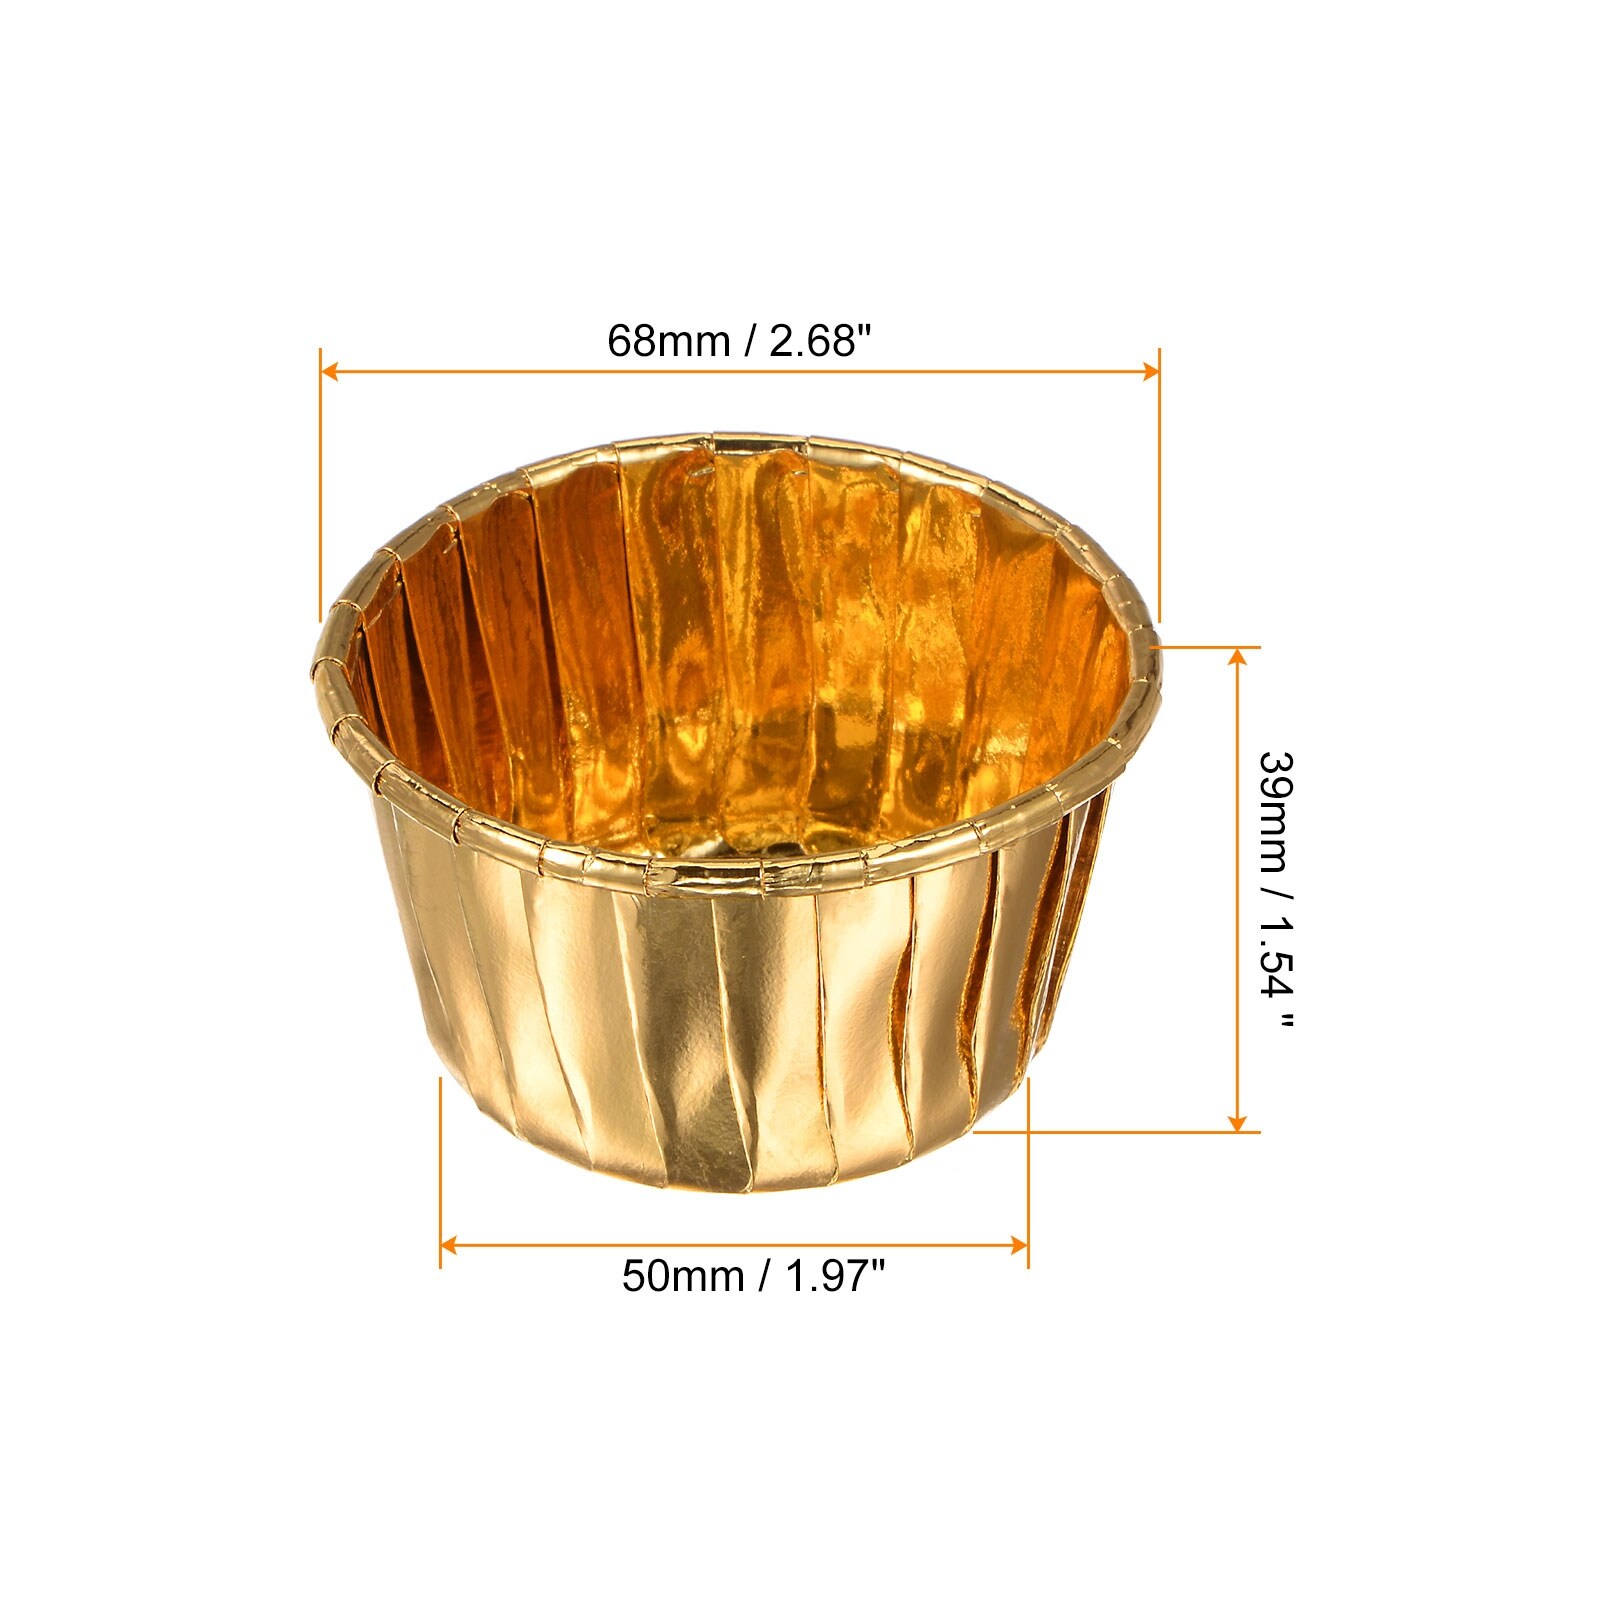 https://ak1.ostkcdn.com/images/products/is/images/direct/faa25b5211042cea8bcbc722d28667eb36bc7bc0/Cupcake-Cups%2C-100pcs-Aluminum-Foil-Standard-Cupcake-Liners.jpg